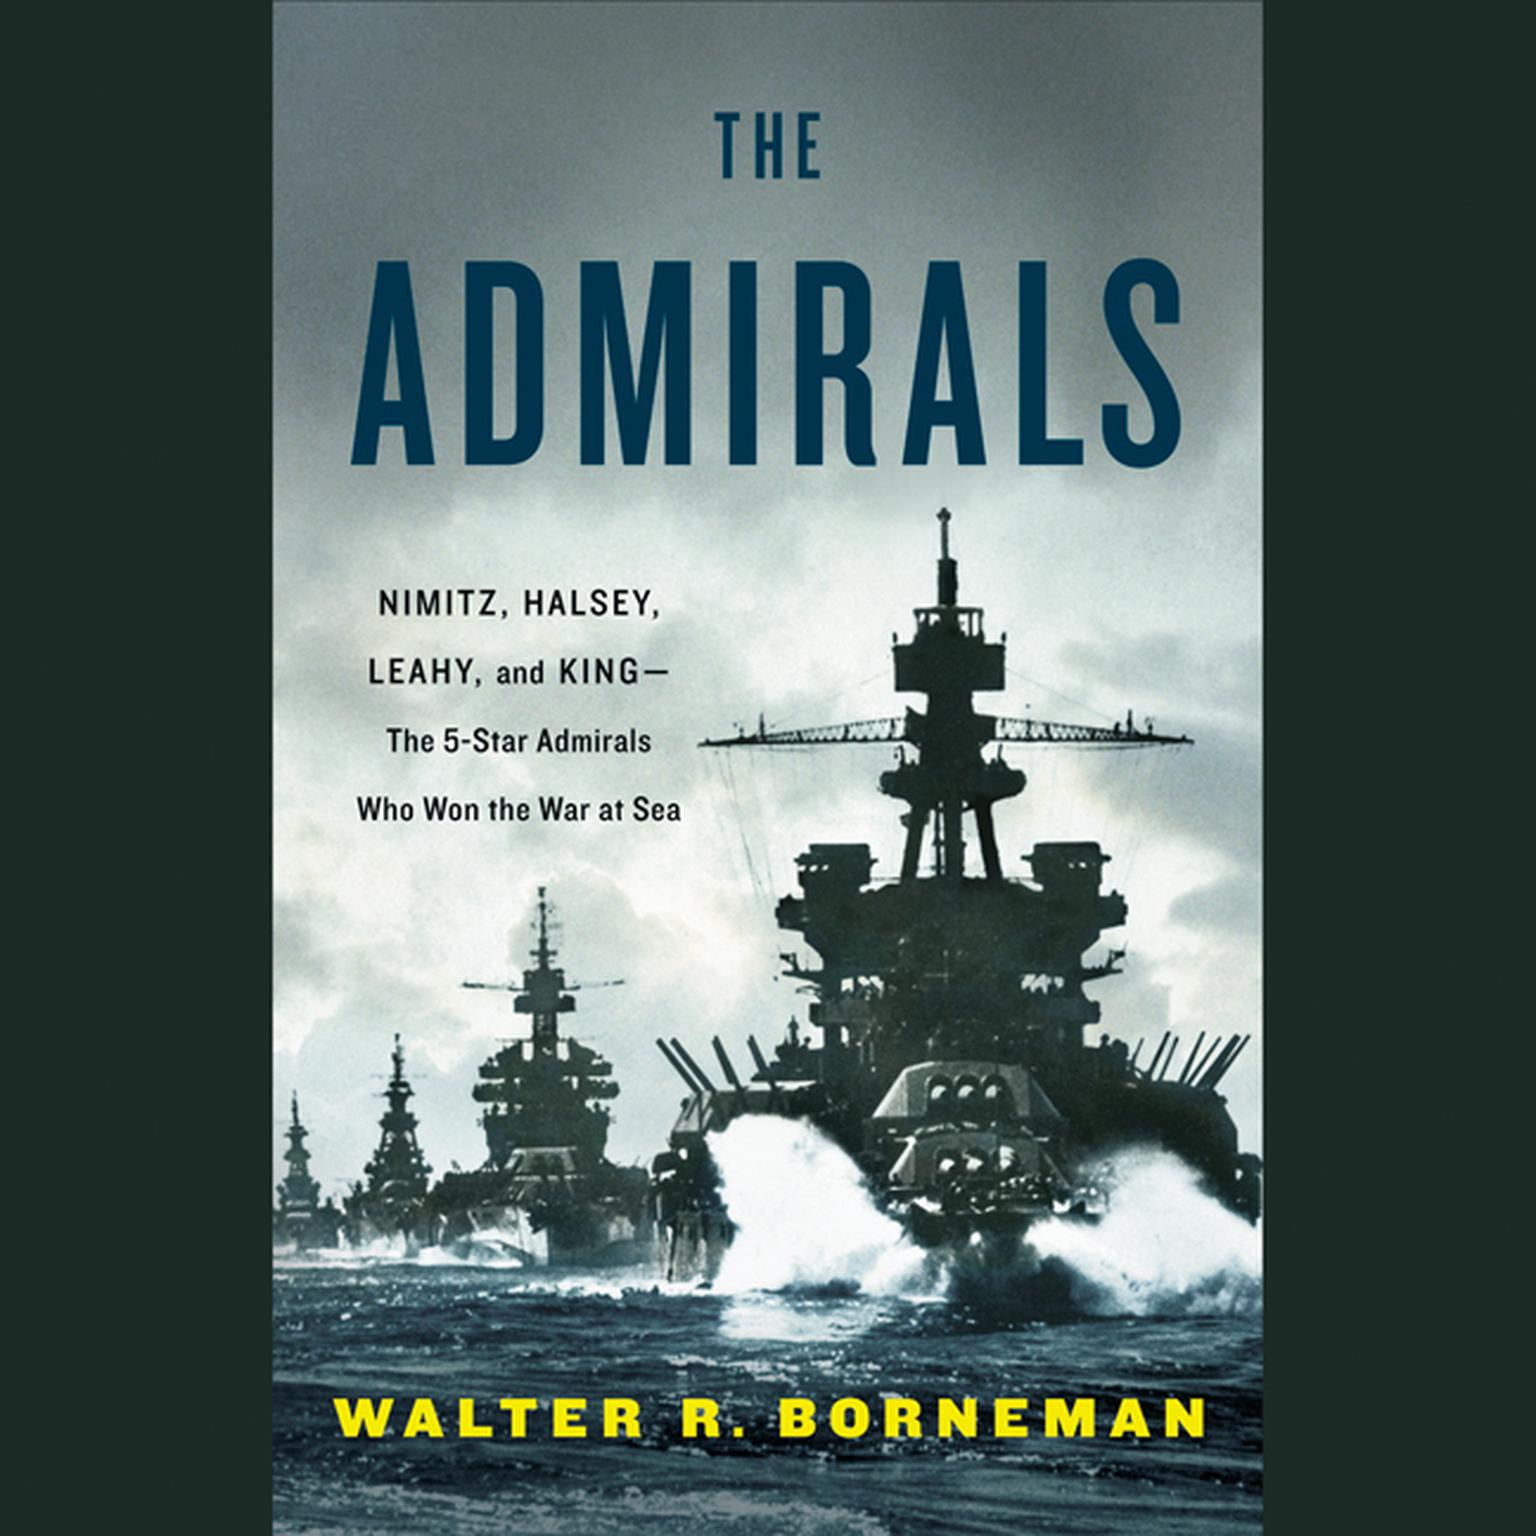 The Admirals: Nimitz, Halsey, Leahy, and King--The Five-Star Admirals Who Won the War at Sea Audiobook, by Walter R. Borneman